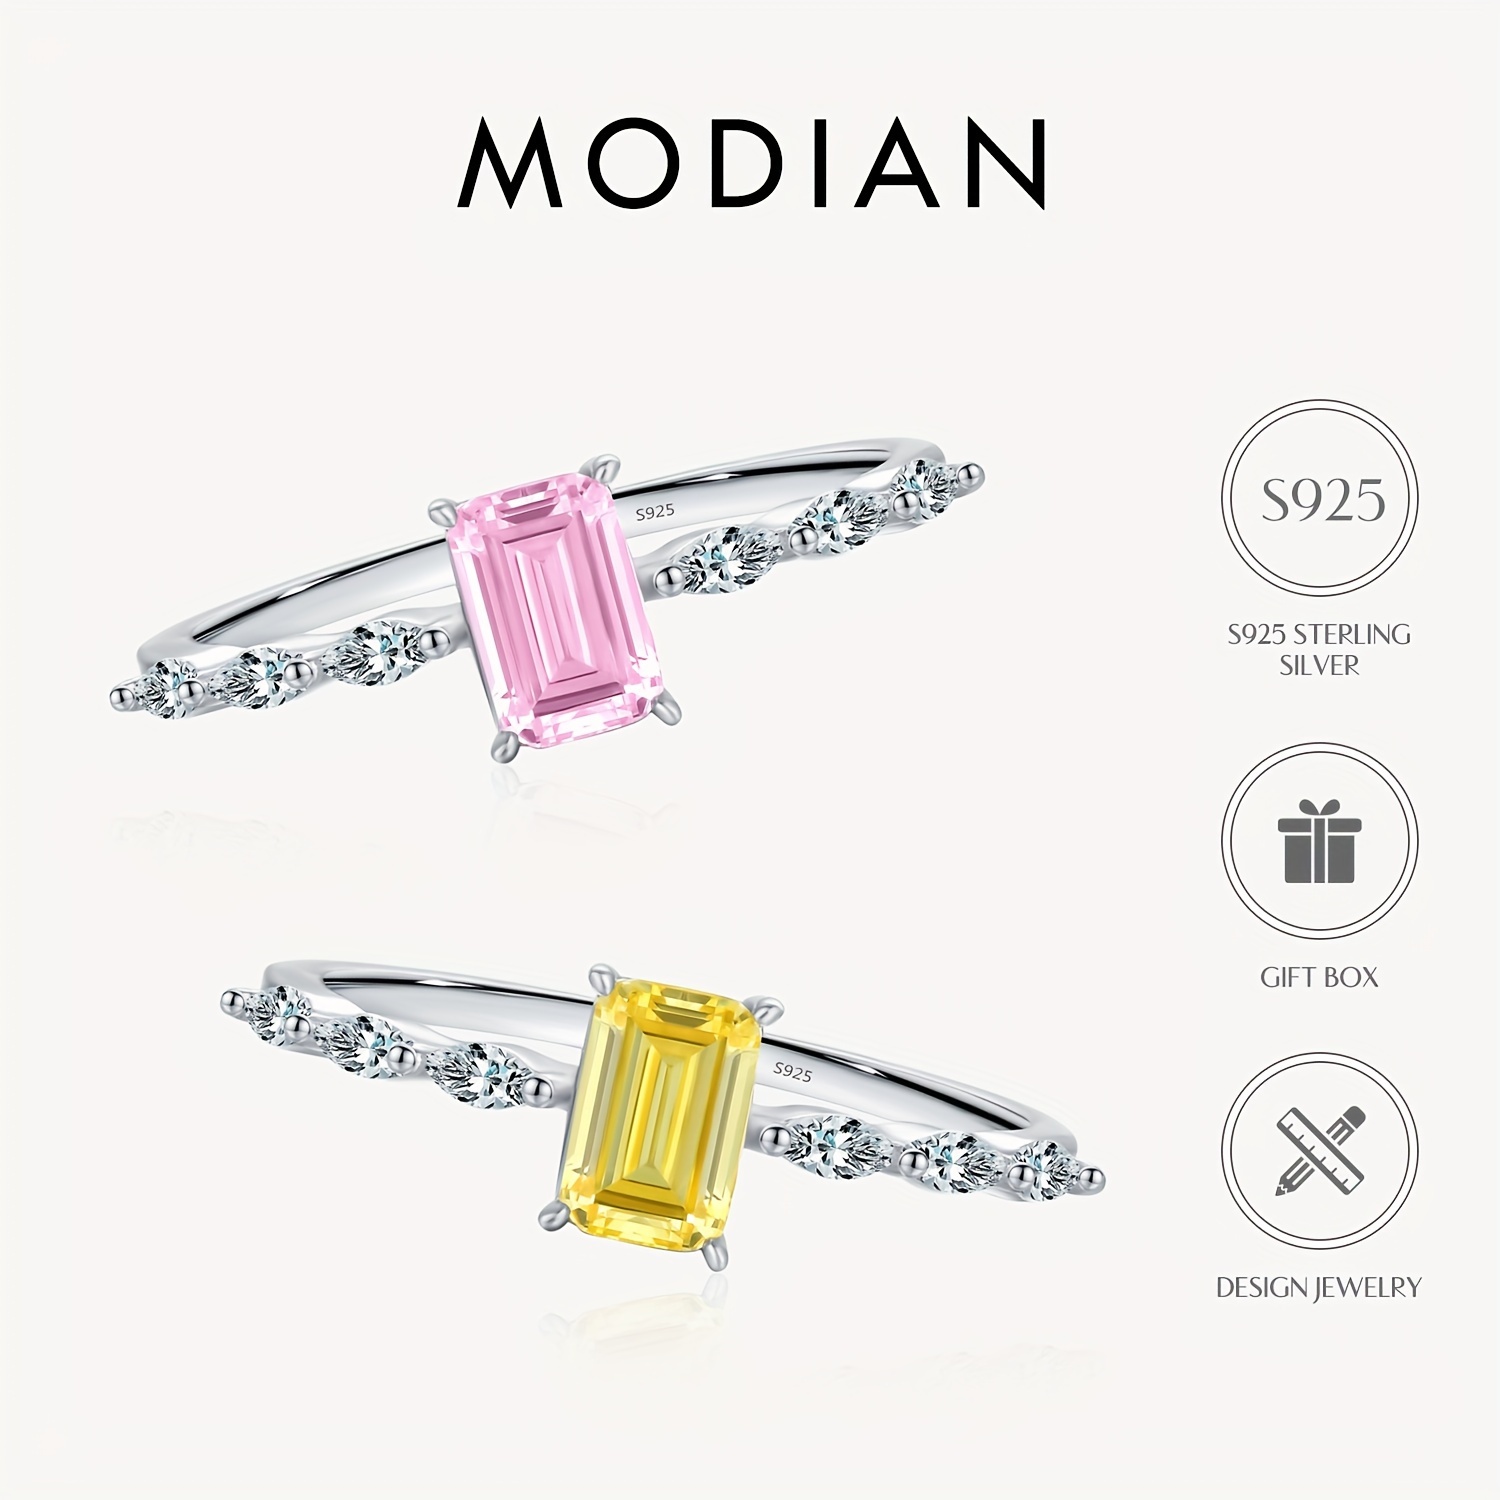 

Modian Elegant S925 Sterling Silver Ring With Pink And Yellow Rectangular Cubic Zirconia Stones, Cute Vacation Style, Hypoallergenic, Perfect For Party And Valentine's Day Gift